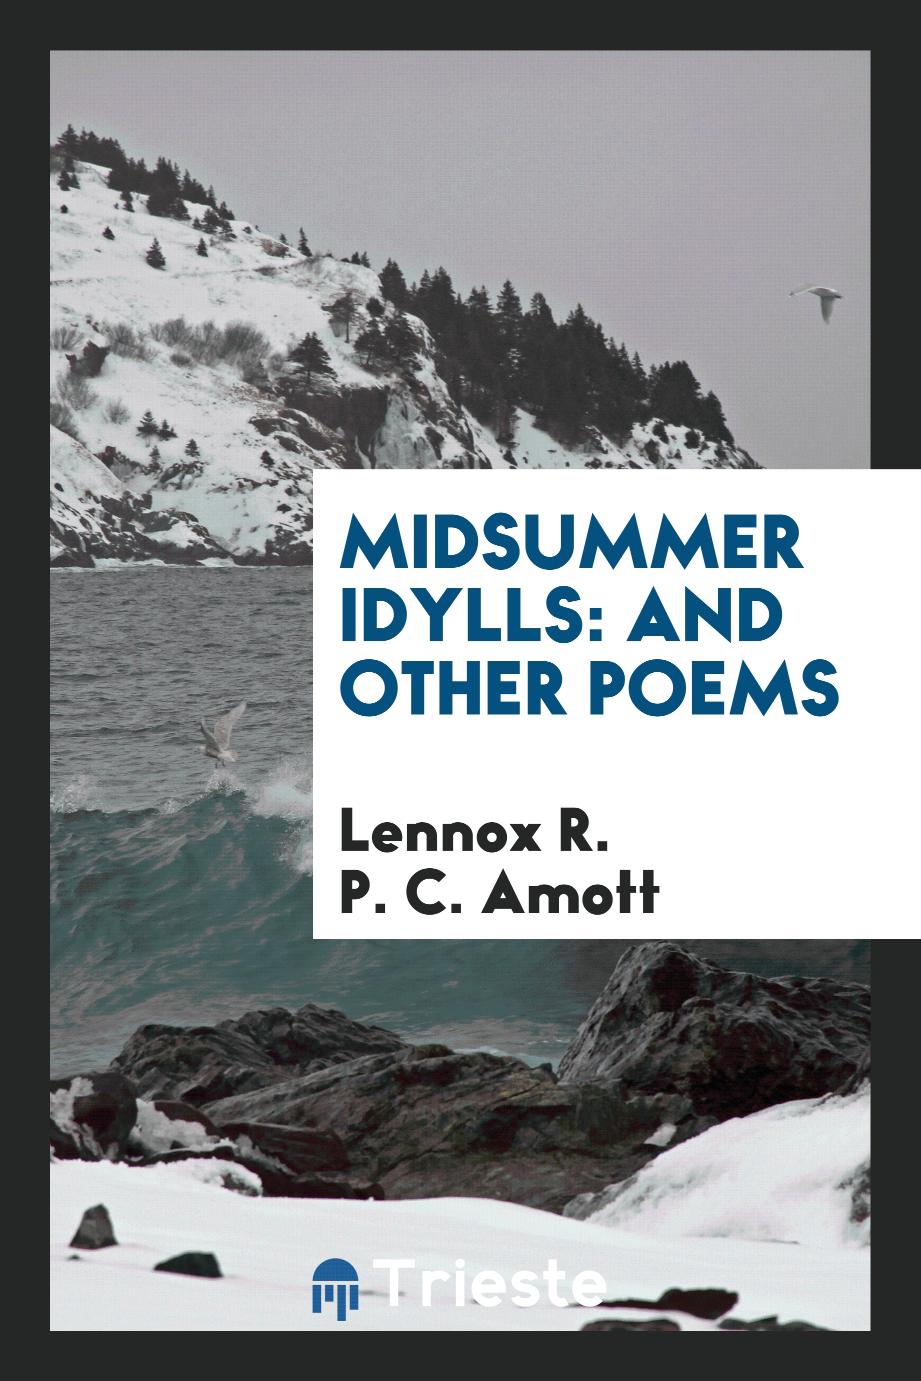 Midsummer Idylls: And Other Poems